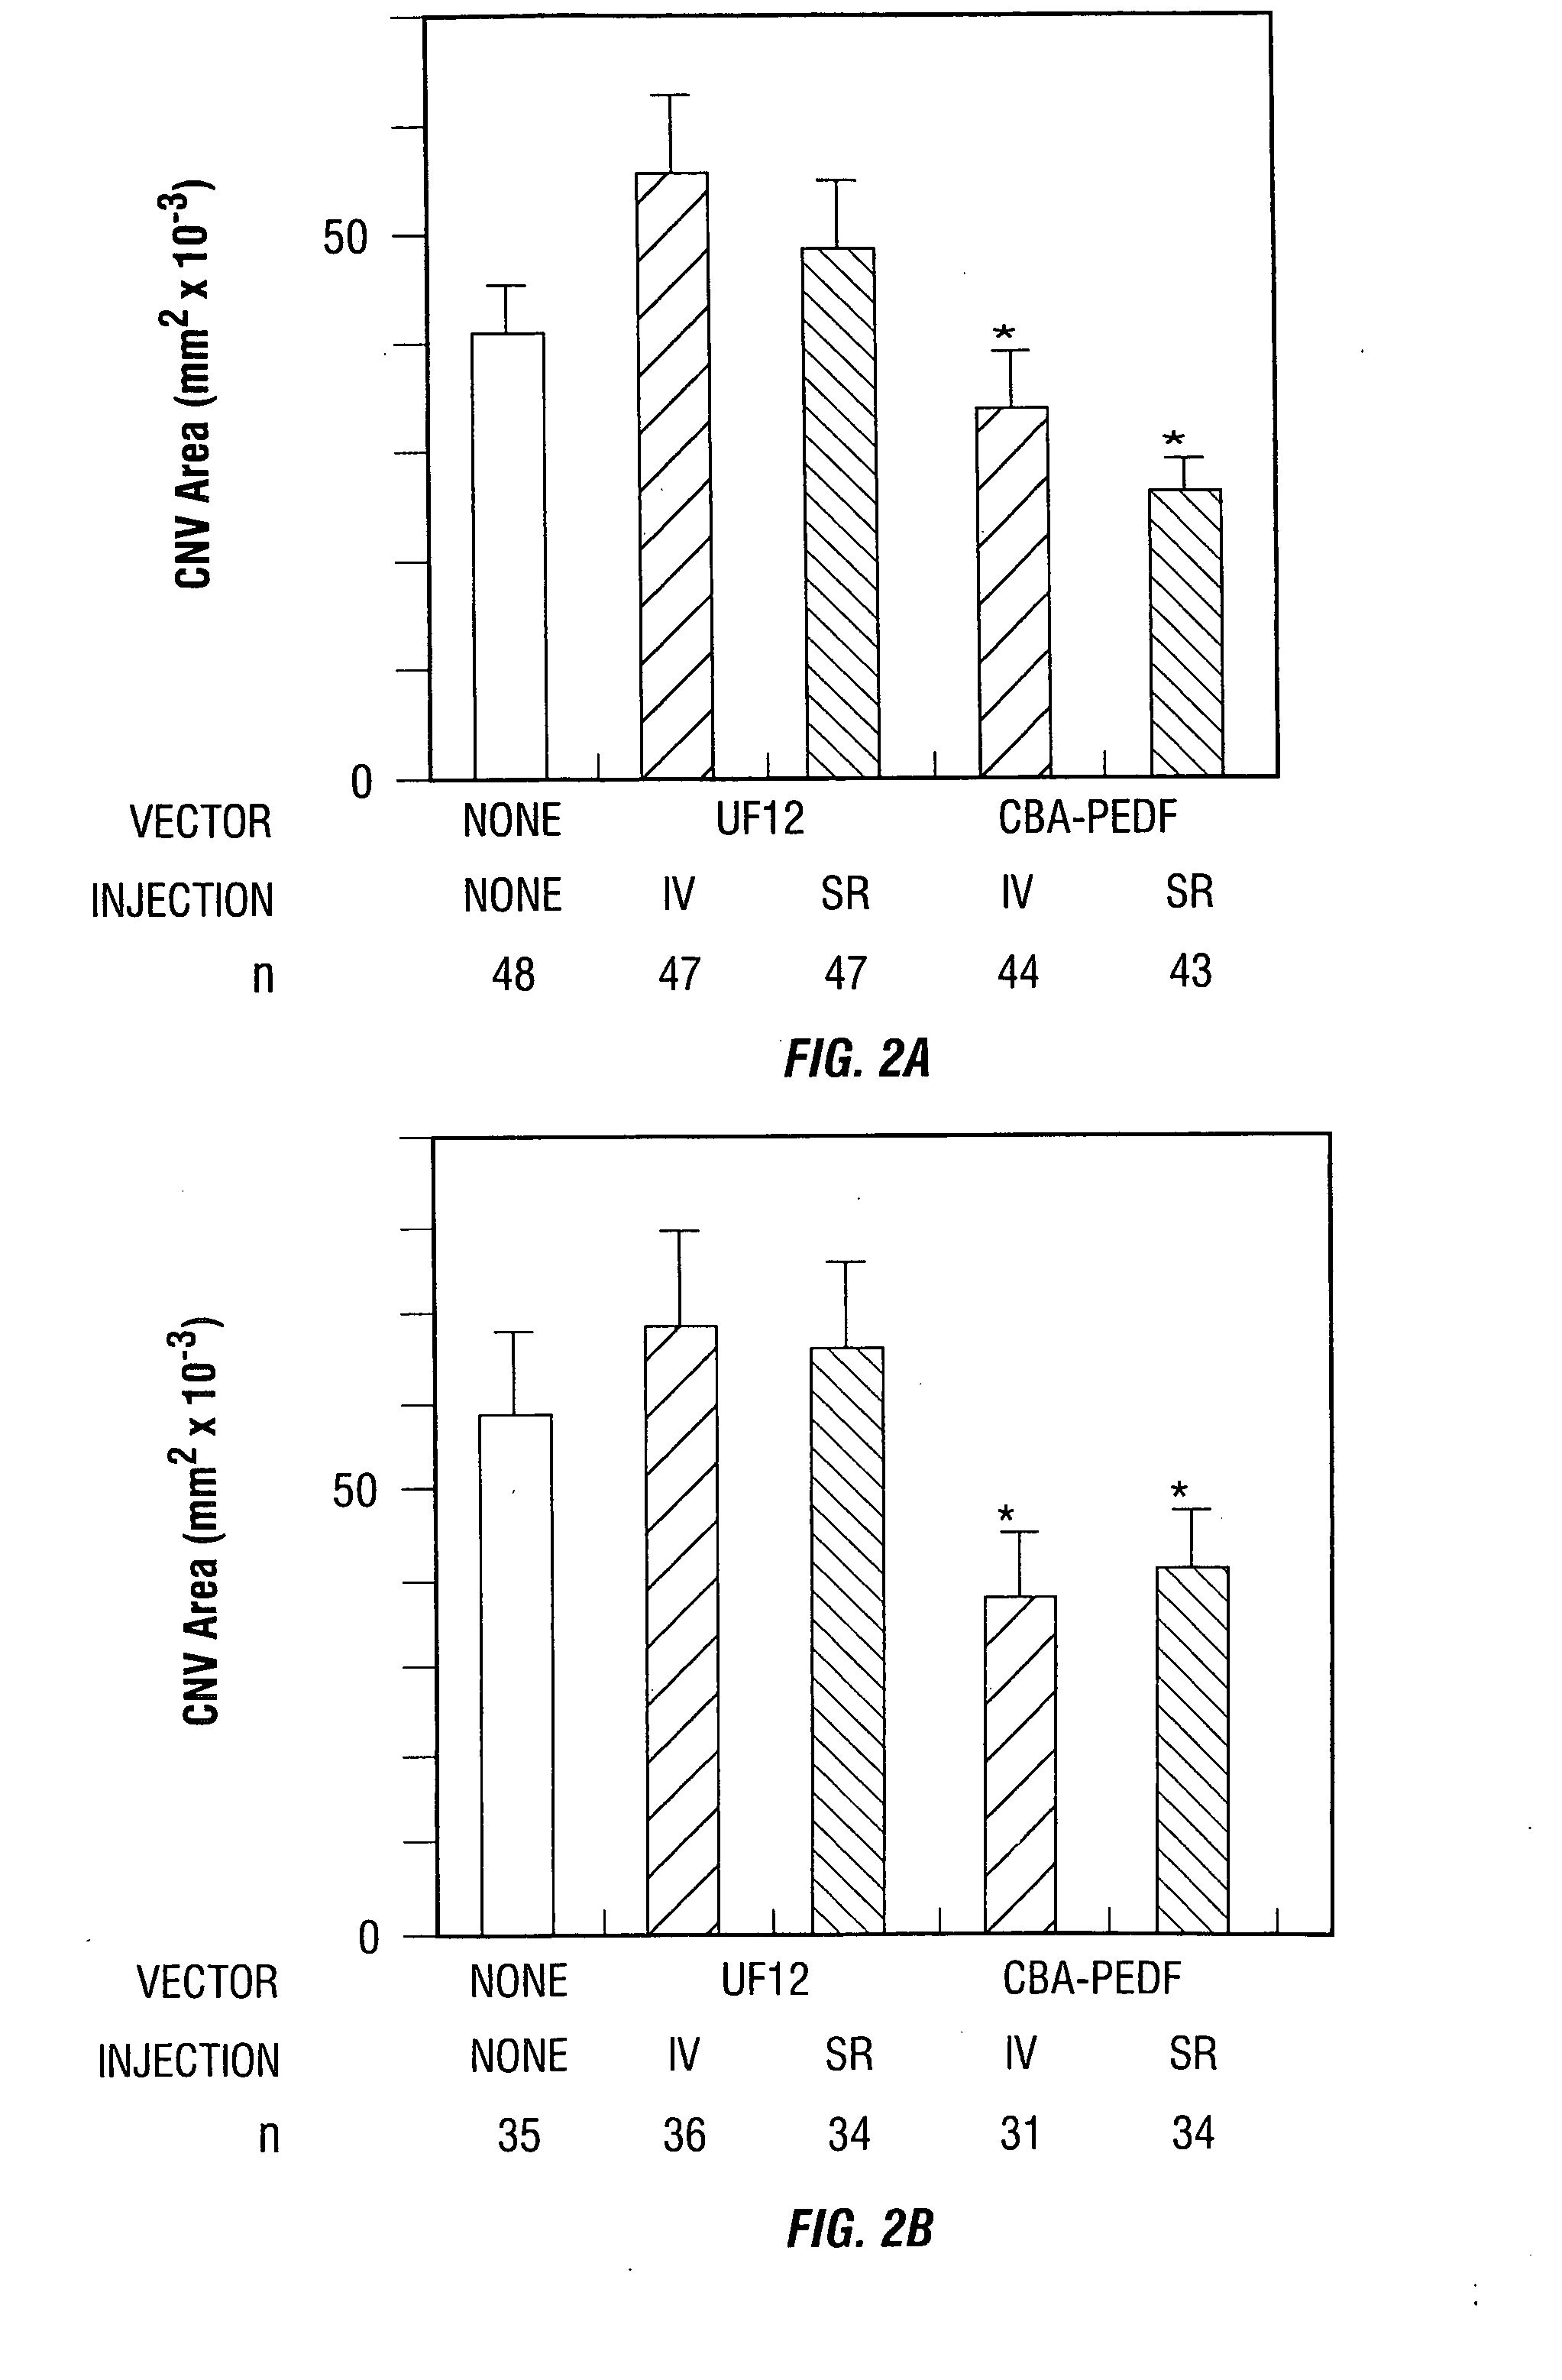 Raav vector compositions and methods for the treatment of choroidal neovascularization